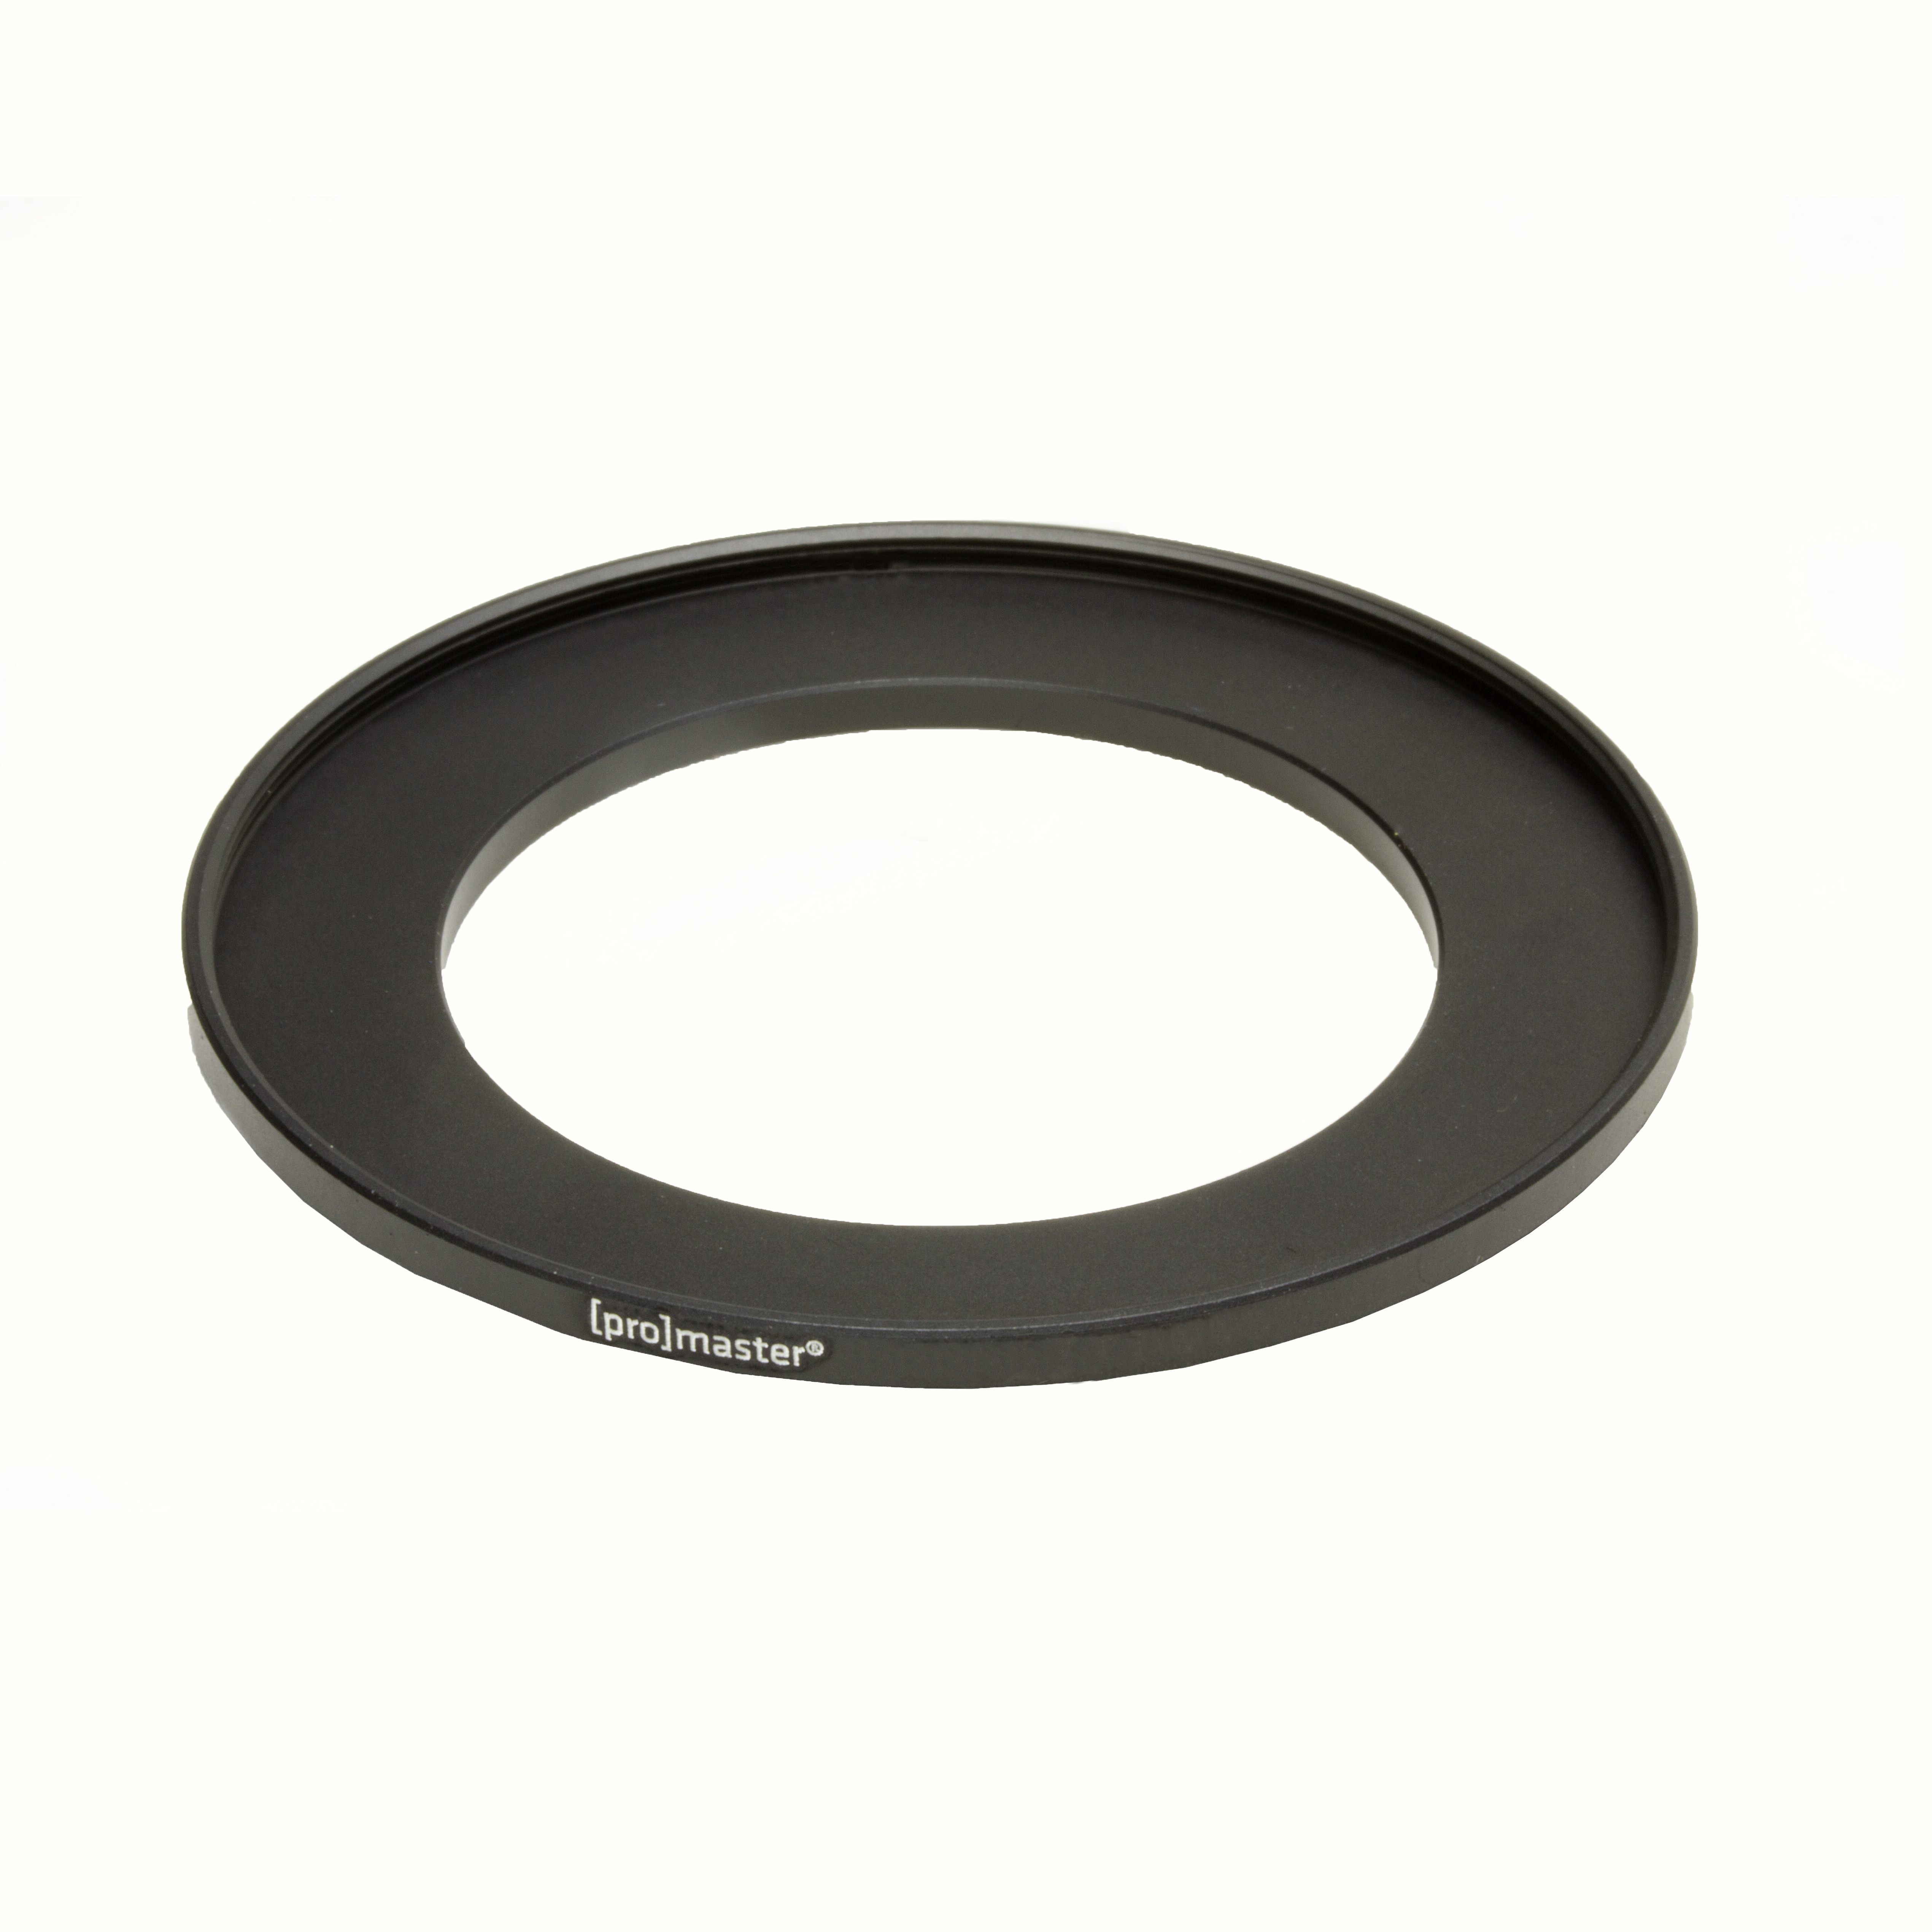 Promaster 5082 62-72mm Step-Up Ring